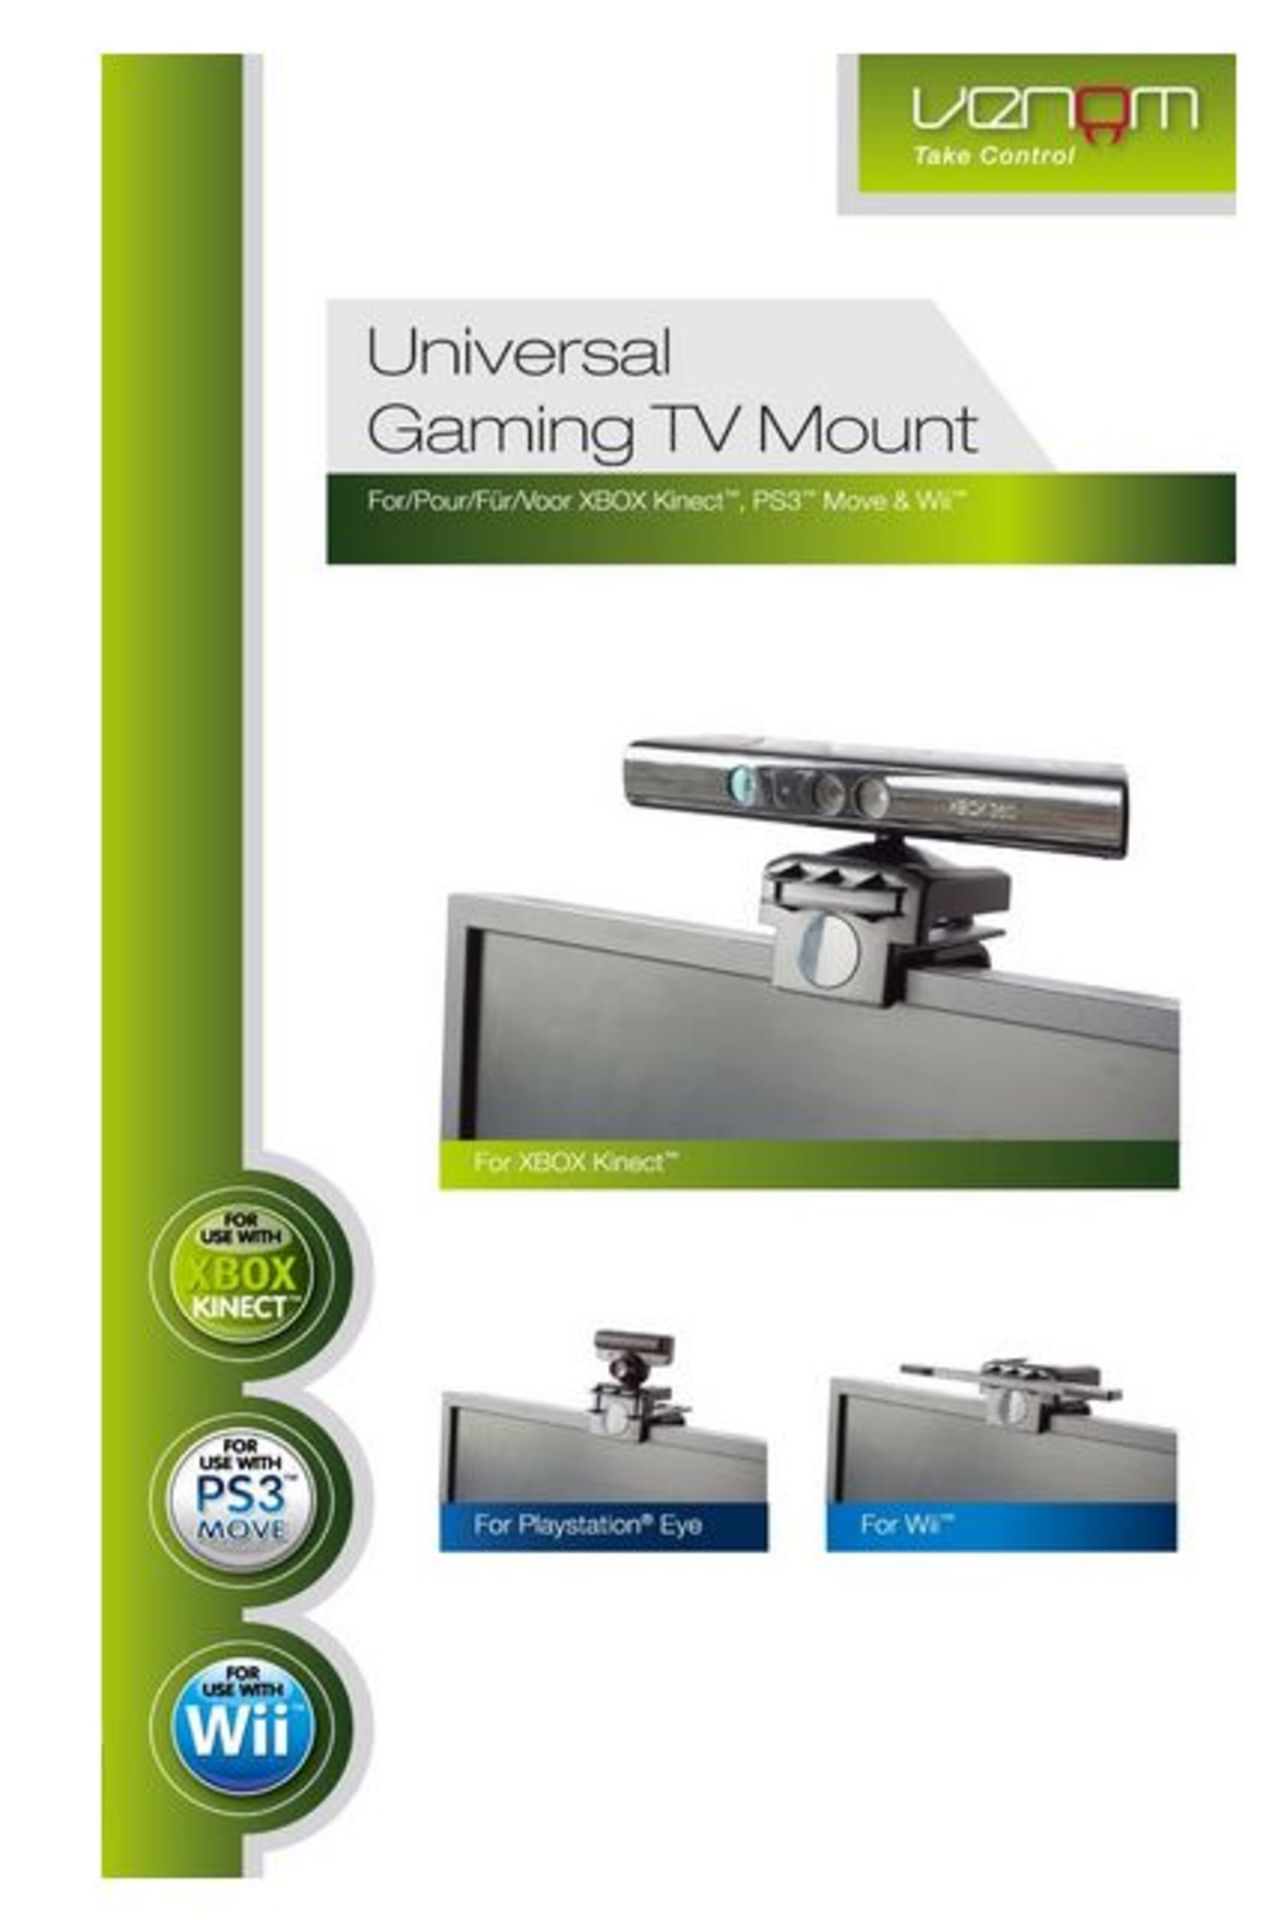 Lot of 50 Units-Universal Gaming TV Mount (Xbox 360/PS3/Wii)